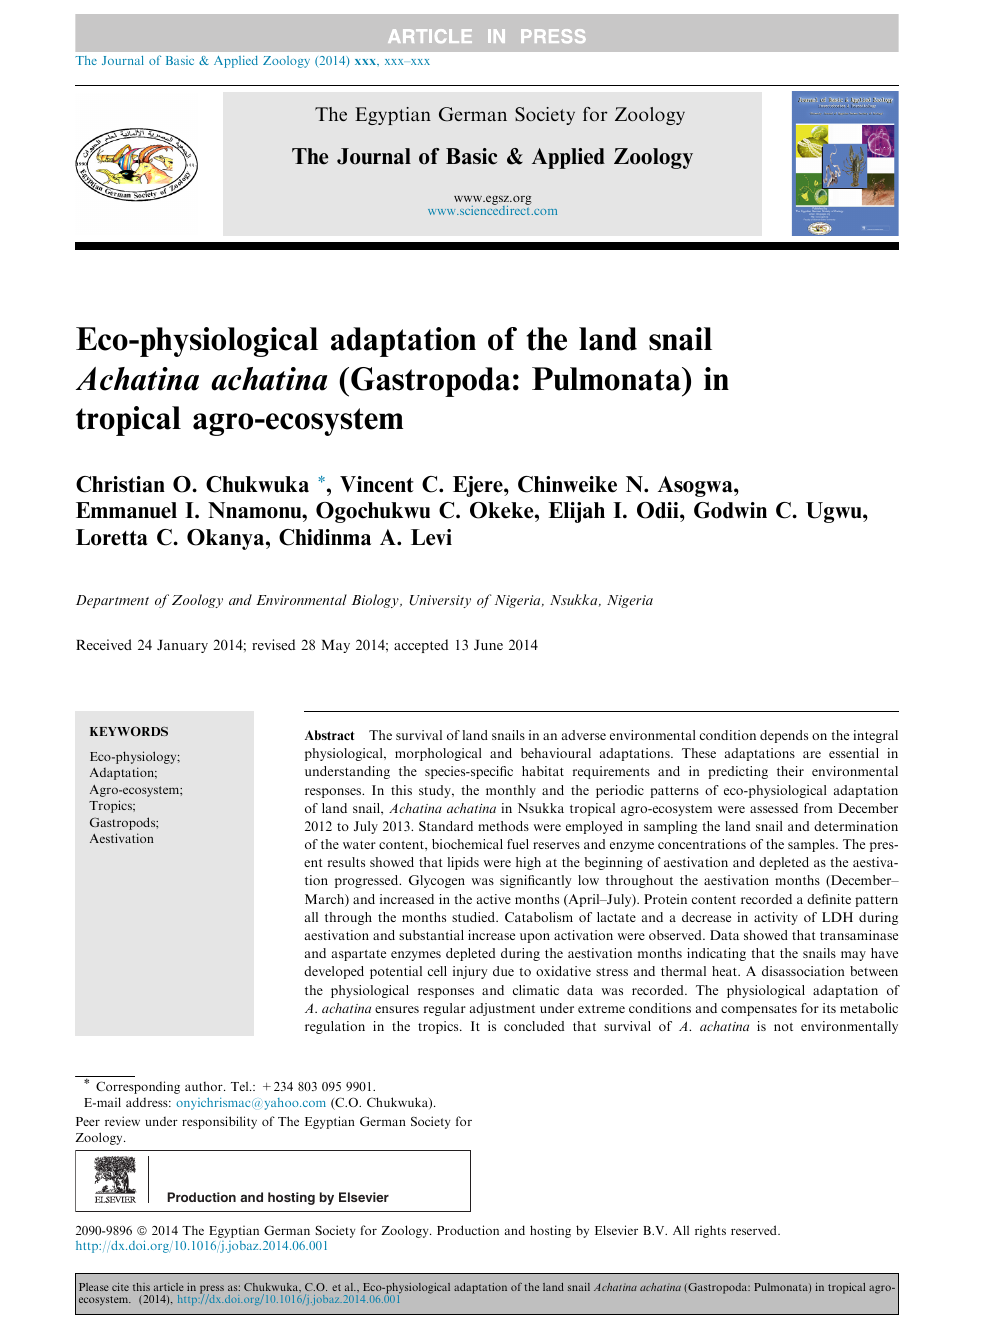 Eco Physiological Adaptation Of The Land Snail Achatina Achatina Gastropoda Pulmonata In Tropical Agro Ecosystem Topic Of Research Paper In Biological Sciences Download Scholarly Article Pdf And Read For Free On Cyberleninka Open